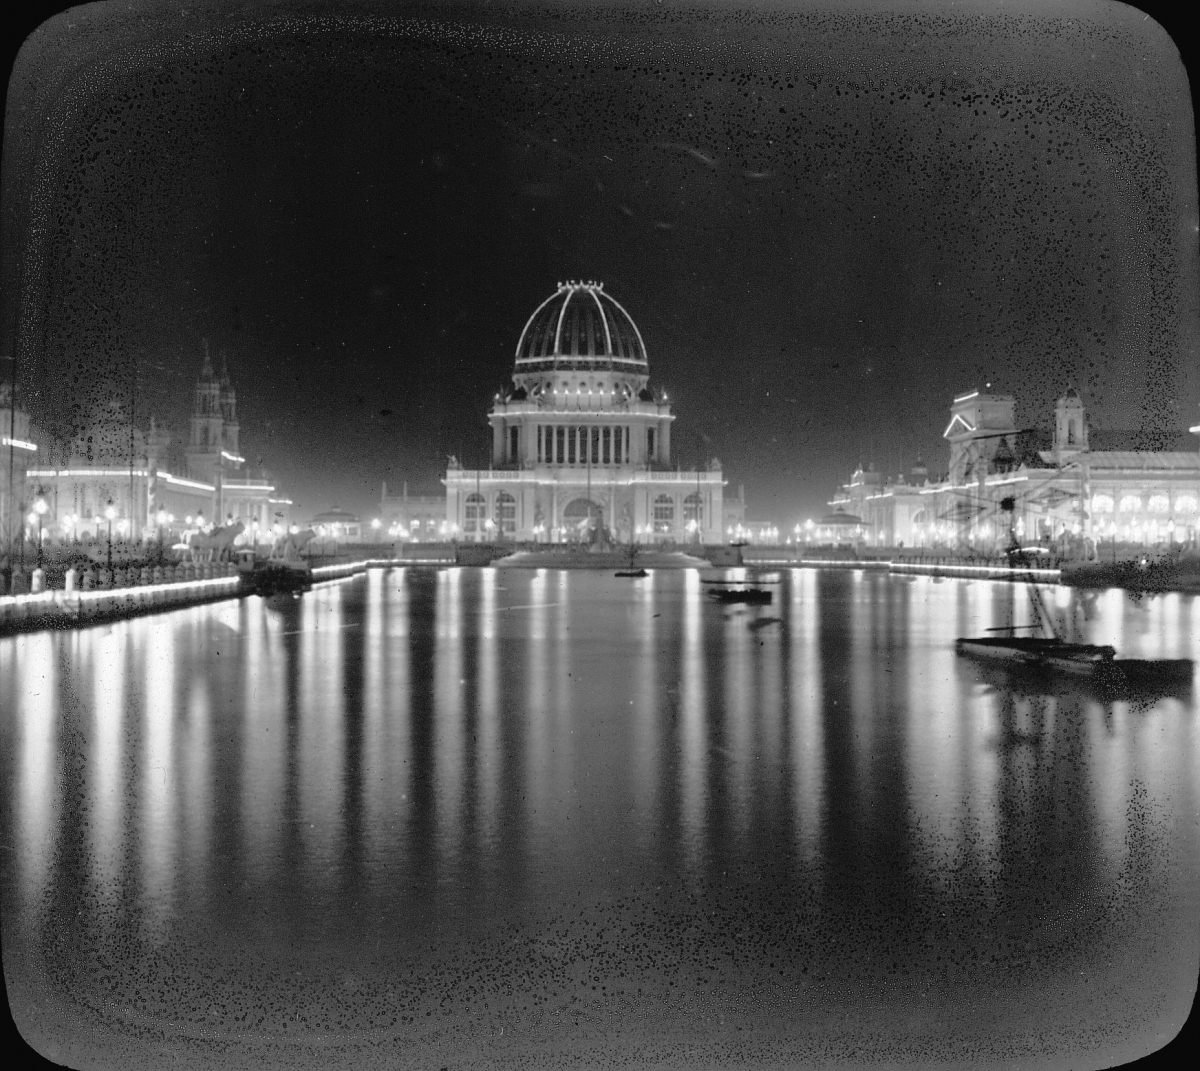 I Can’t Wait To See Martin Scorsese’s Version Of The 1893 World’s Fair